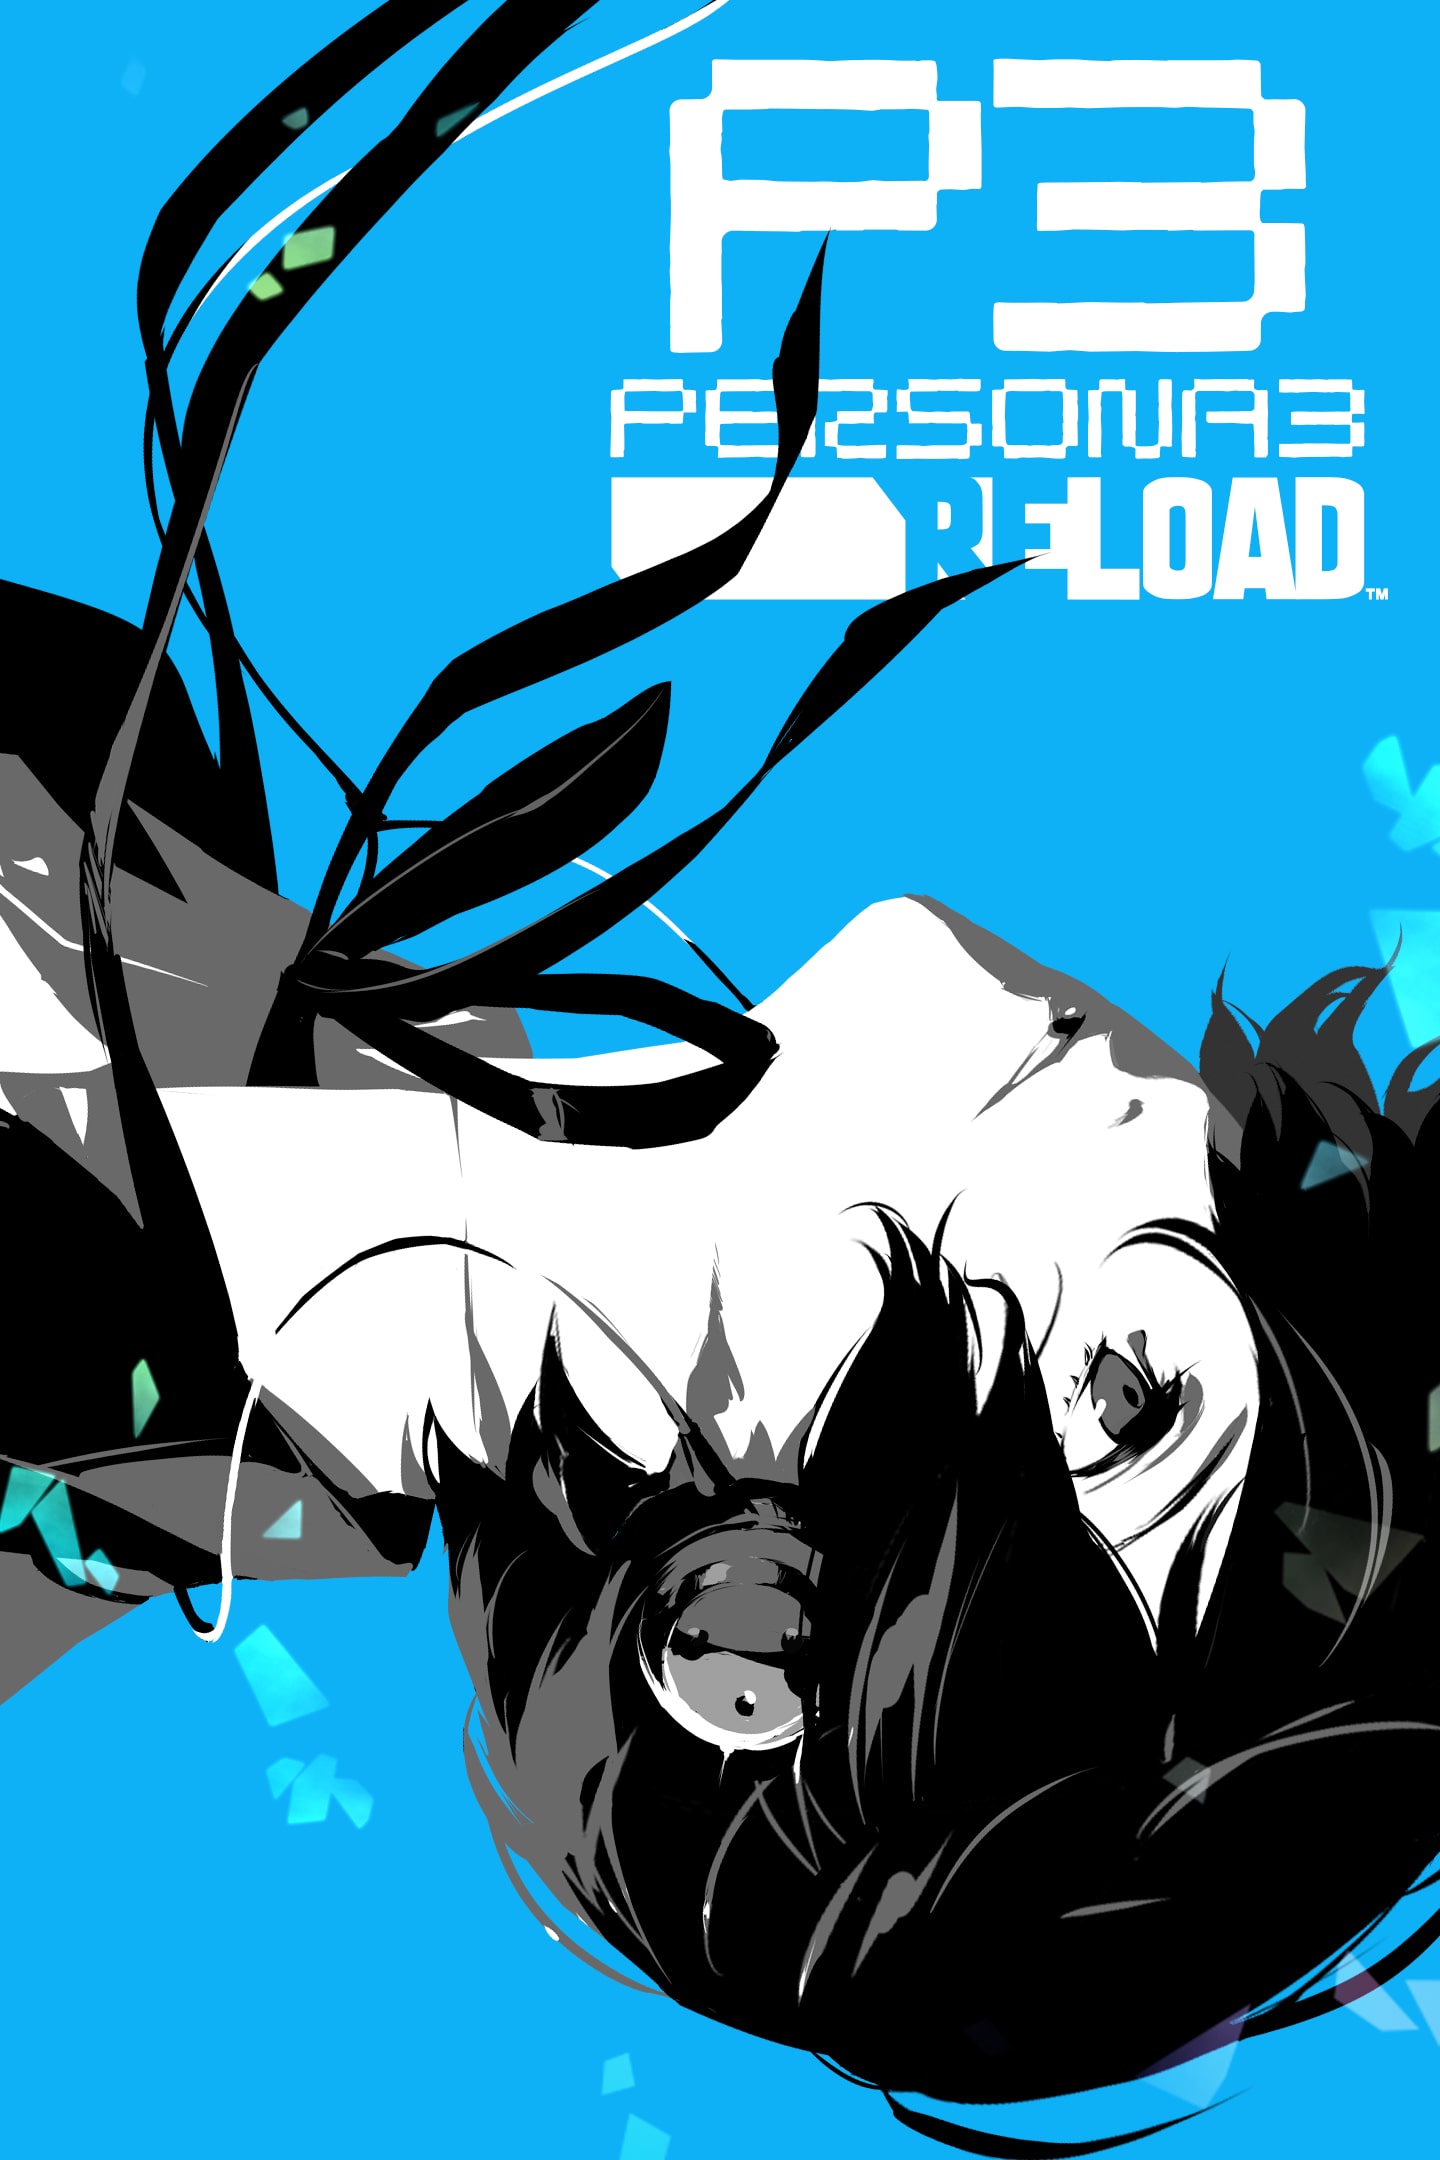 PS5 Persona 3 Reload Aigis Edition (English/Chinese) * 女神異聞錄 3 Reload 典藏版 *  – HeavyArm Store